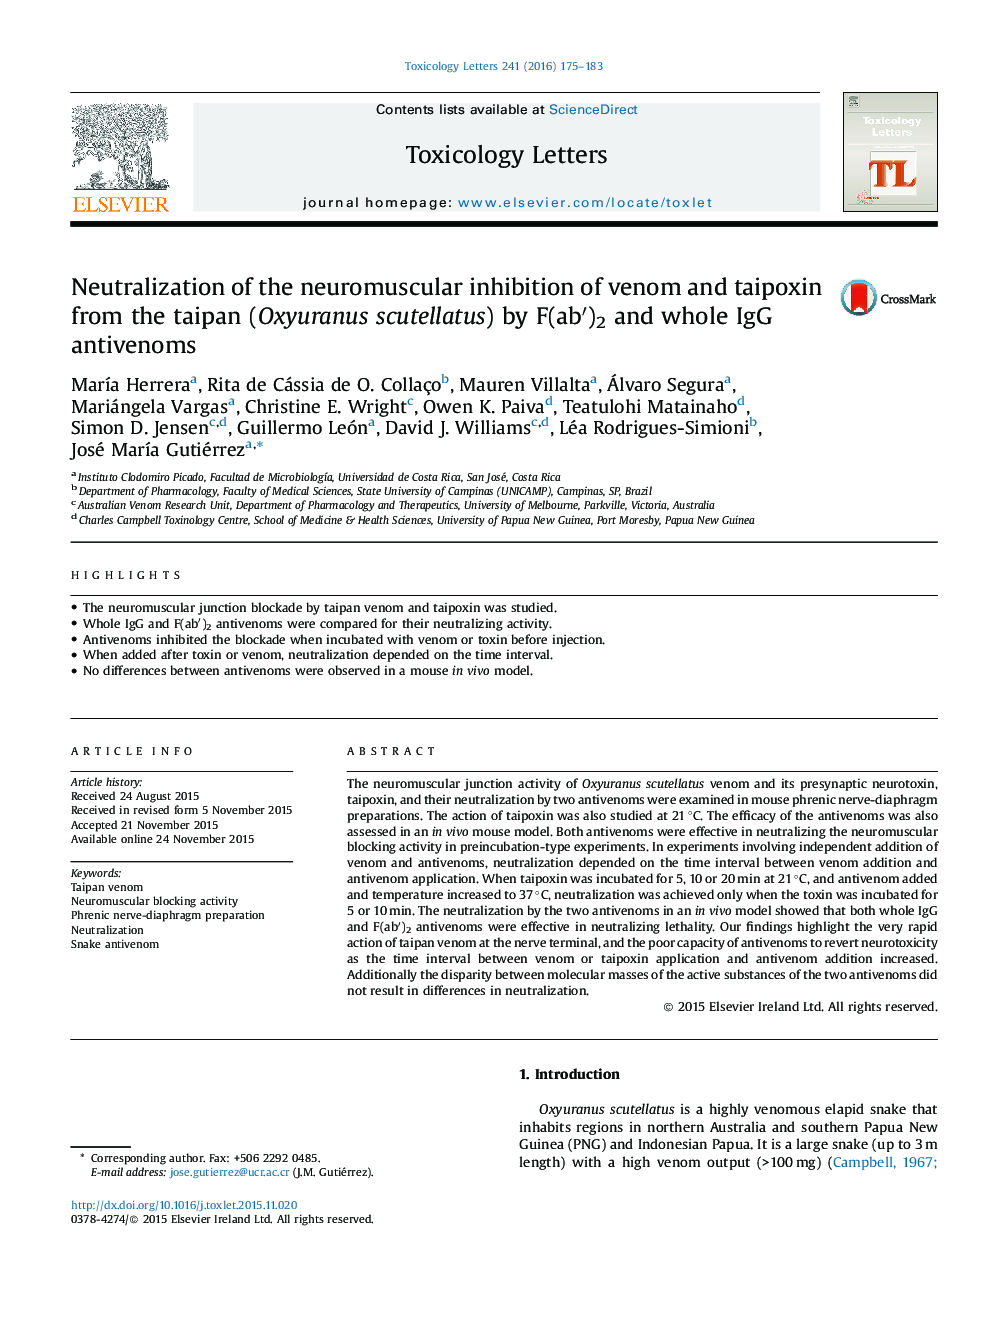 Neutralization of the neuromuscular inhibition of venom and taipoxin from the taipan (Oxyuranus scutellatus) by F(ab′)2 and whole IgG antivenoms